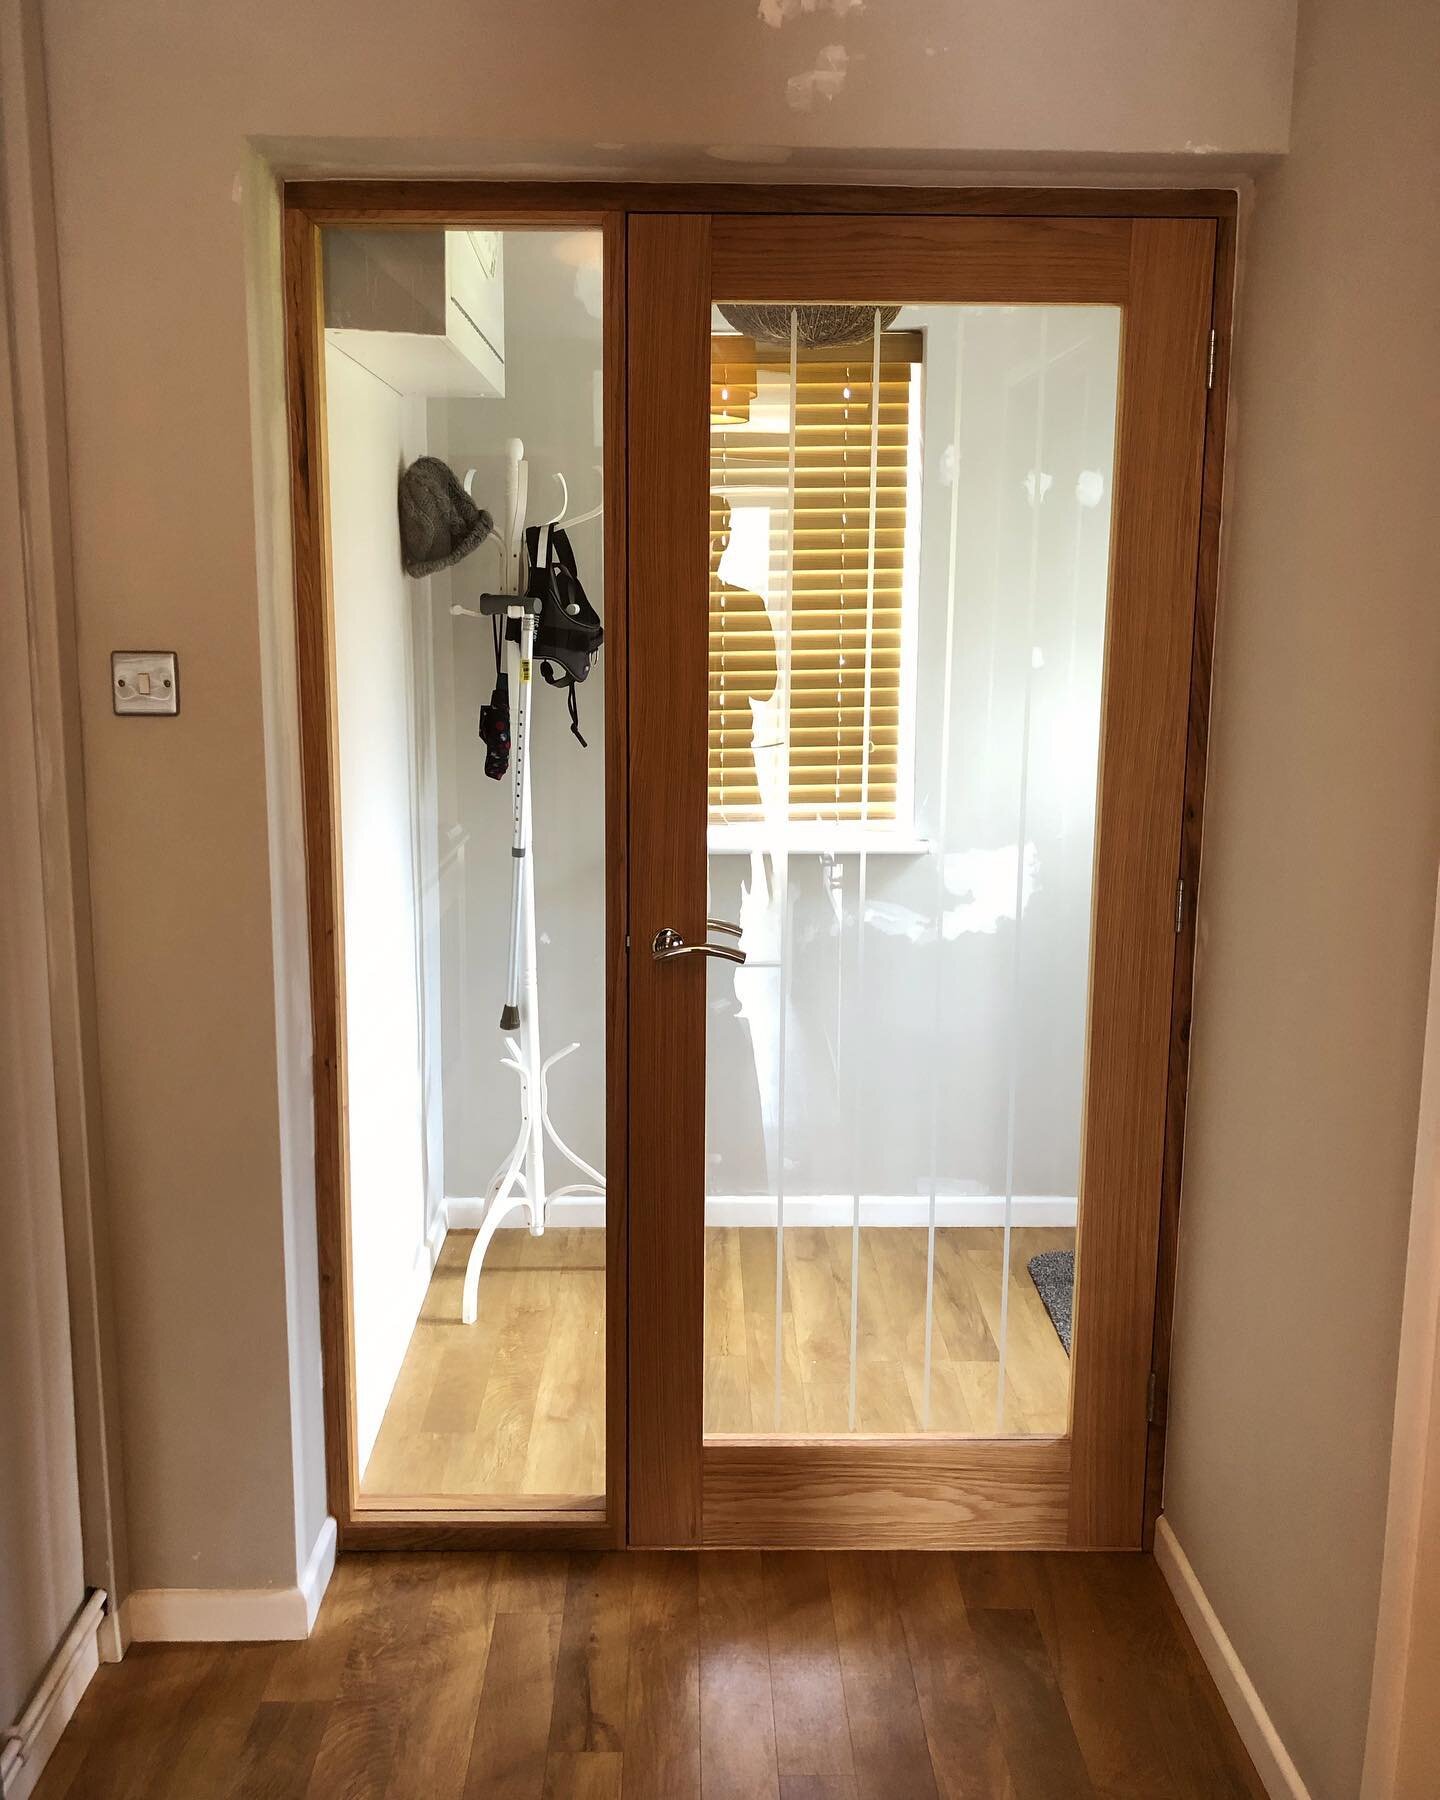 New glazed oak Internal porch door and frame, with low threshold and full glazed sidelight. 
Thanks to @a.b.joinery for making the frame 🙌. 

#oak #porch #internaldoors #oakdoorframe #sidelight #glazedoakdoors #carpentry #joinery #modern #sandrcarpe